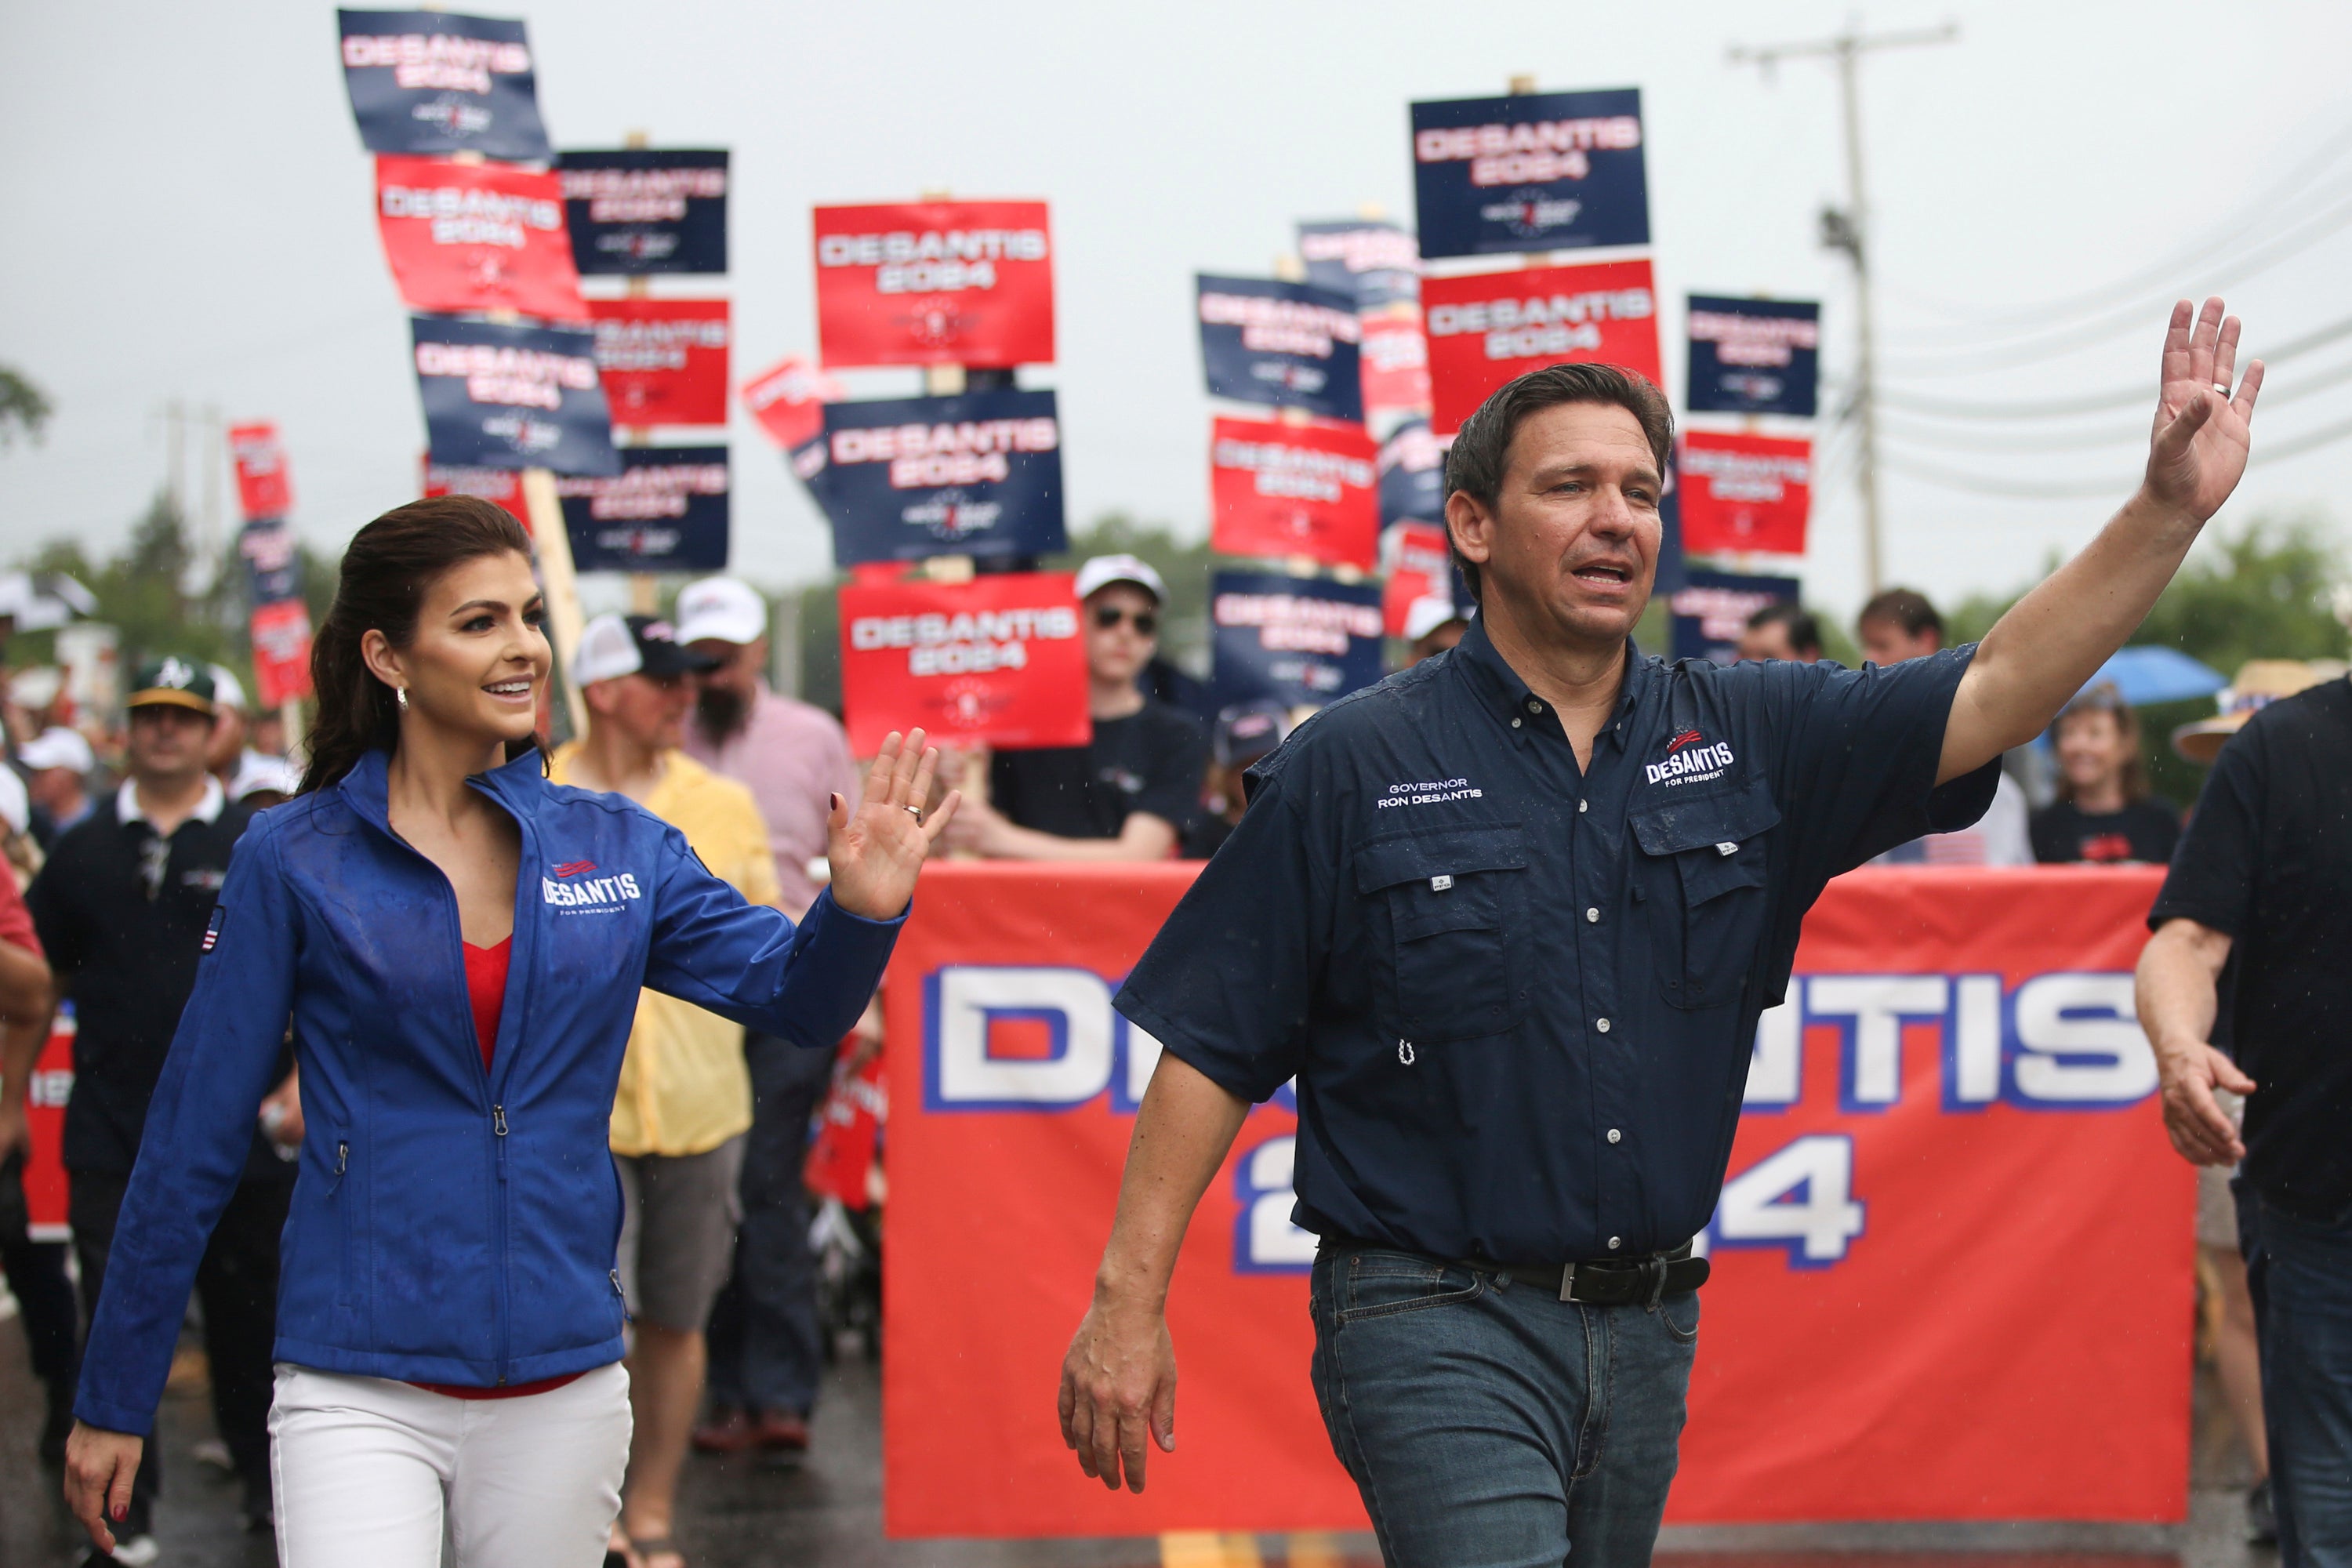 DeSantis to 1st GOP candidate to file for South Carolina primary